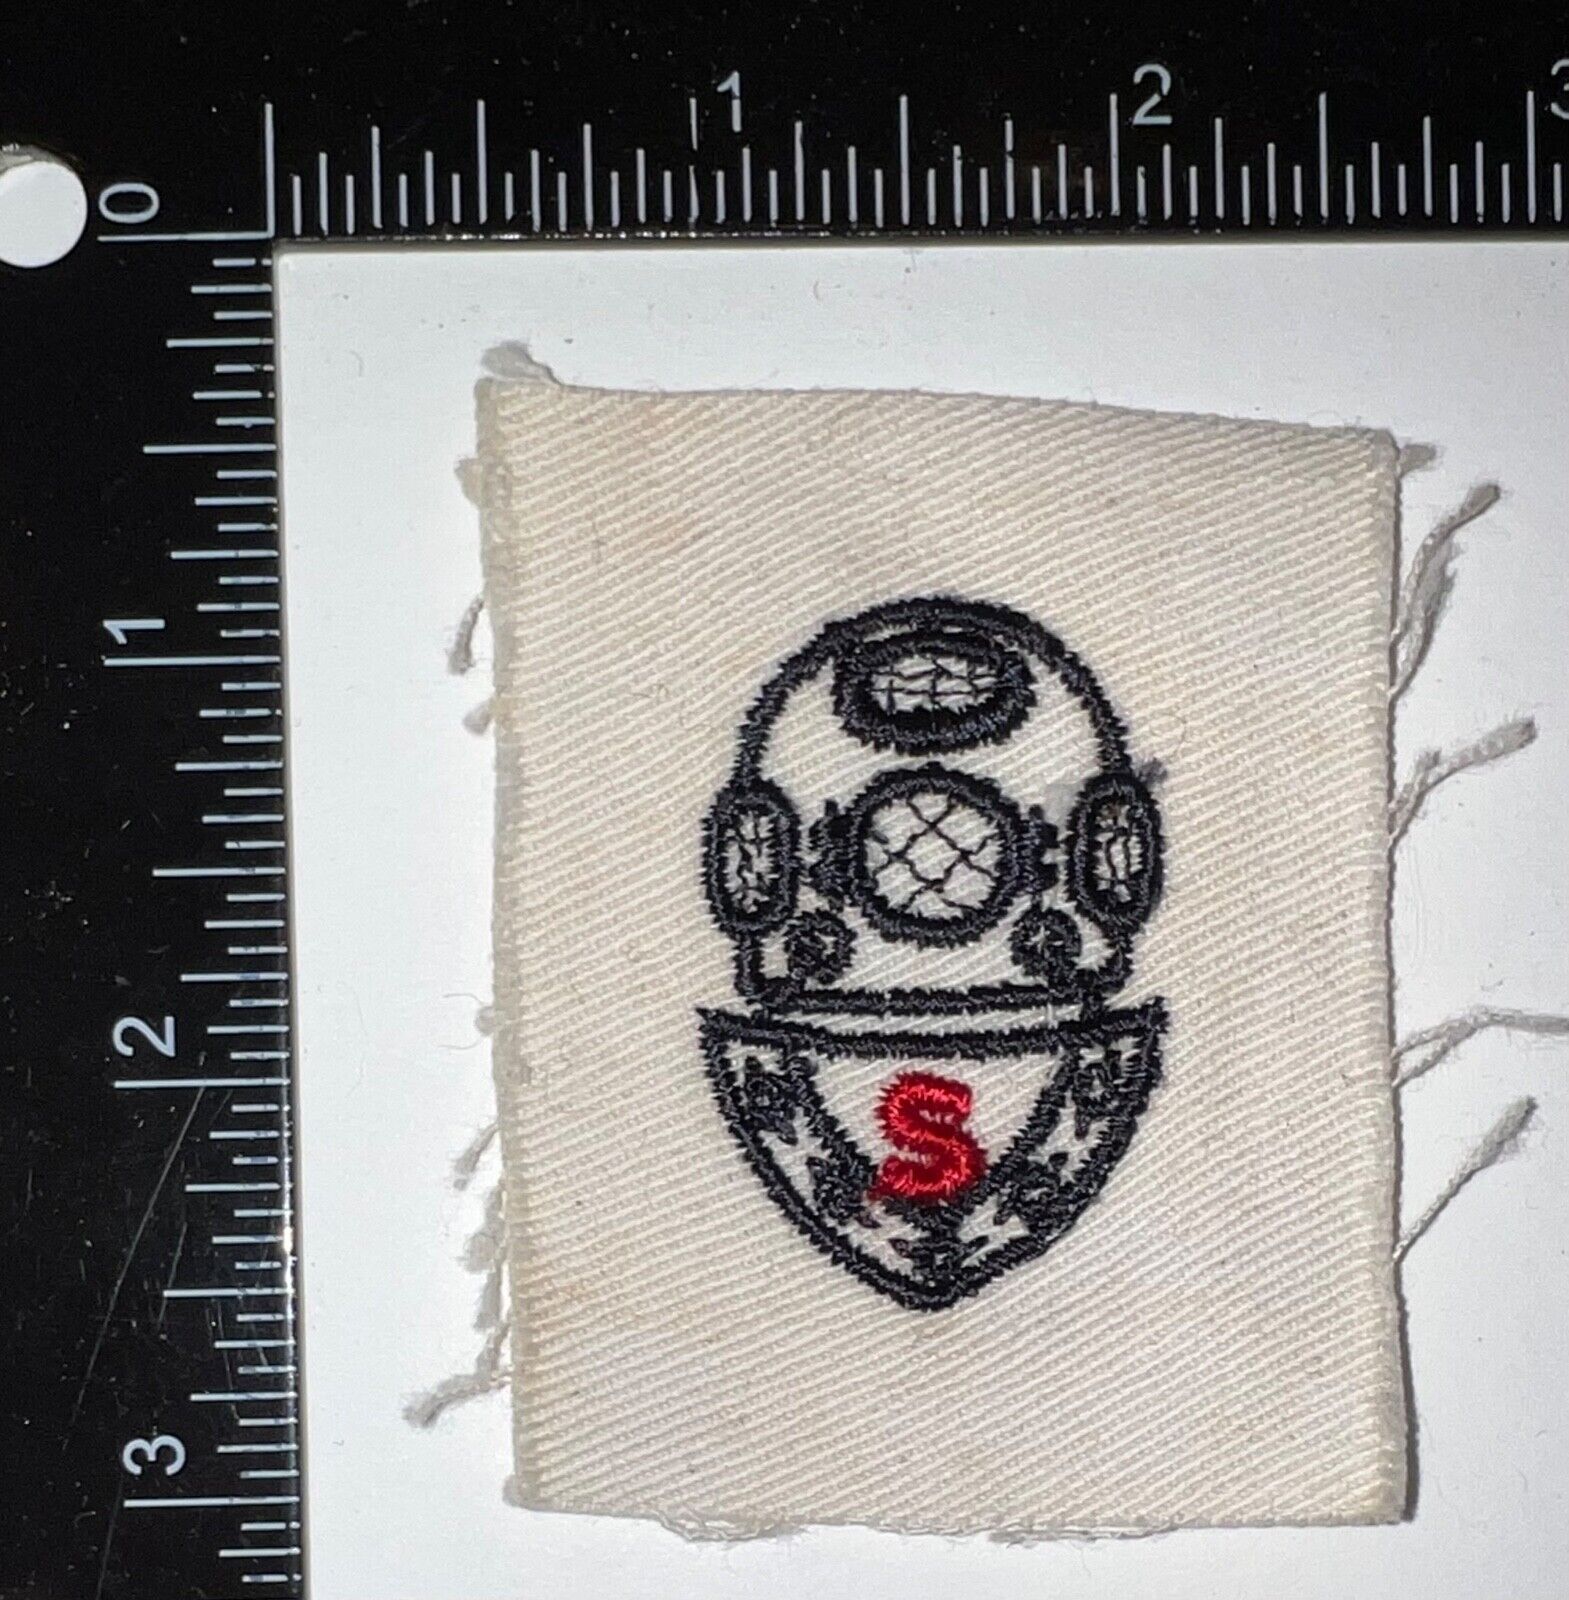 USN US Navy Salvage Diver Distinguishing Qualification Mark White Red S Patch